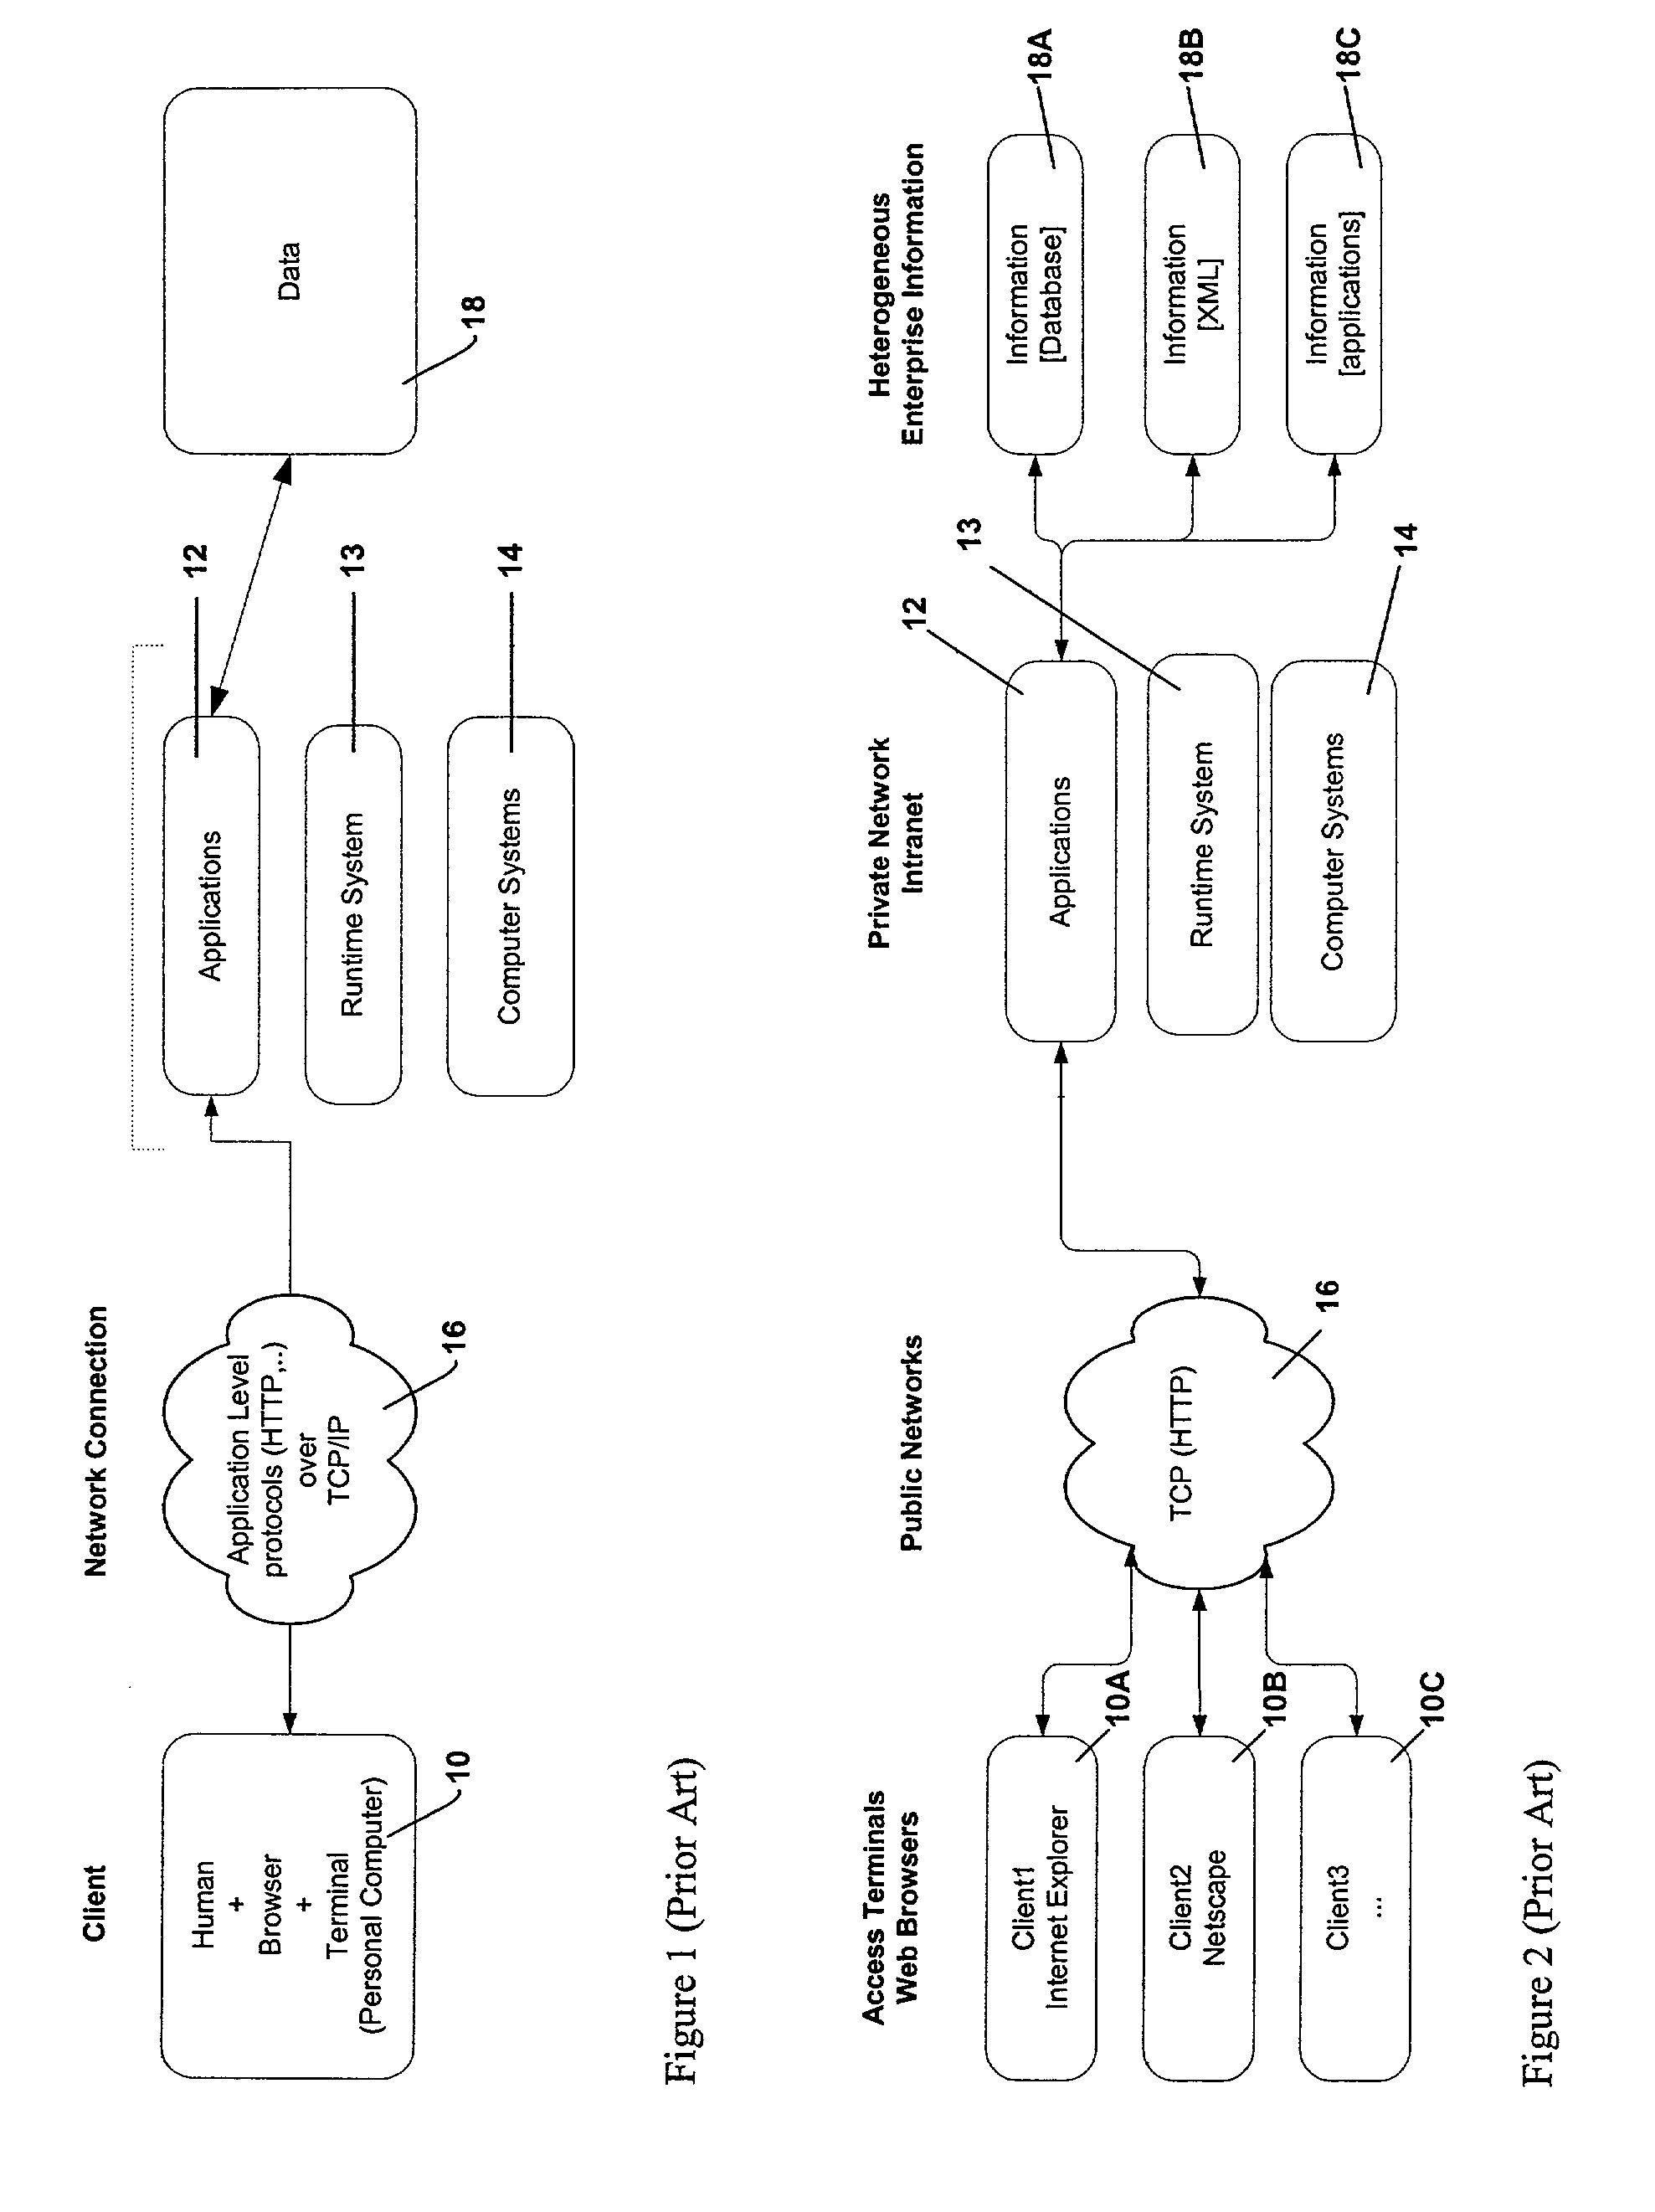 System and method for building multi-modal and multi-channel applications